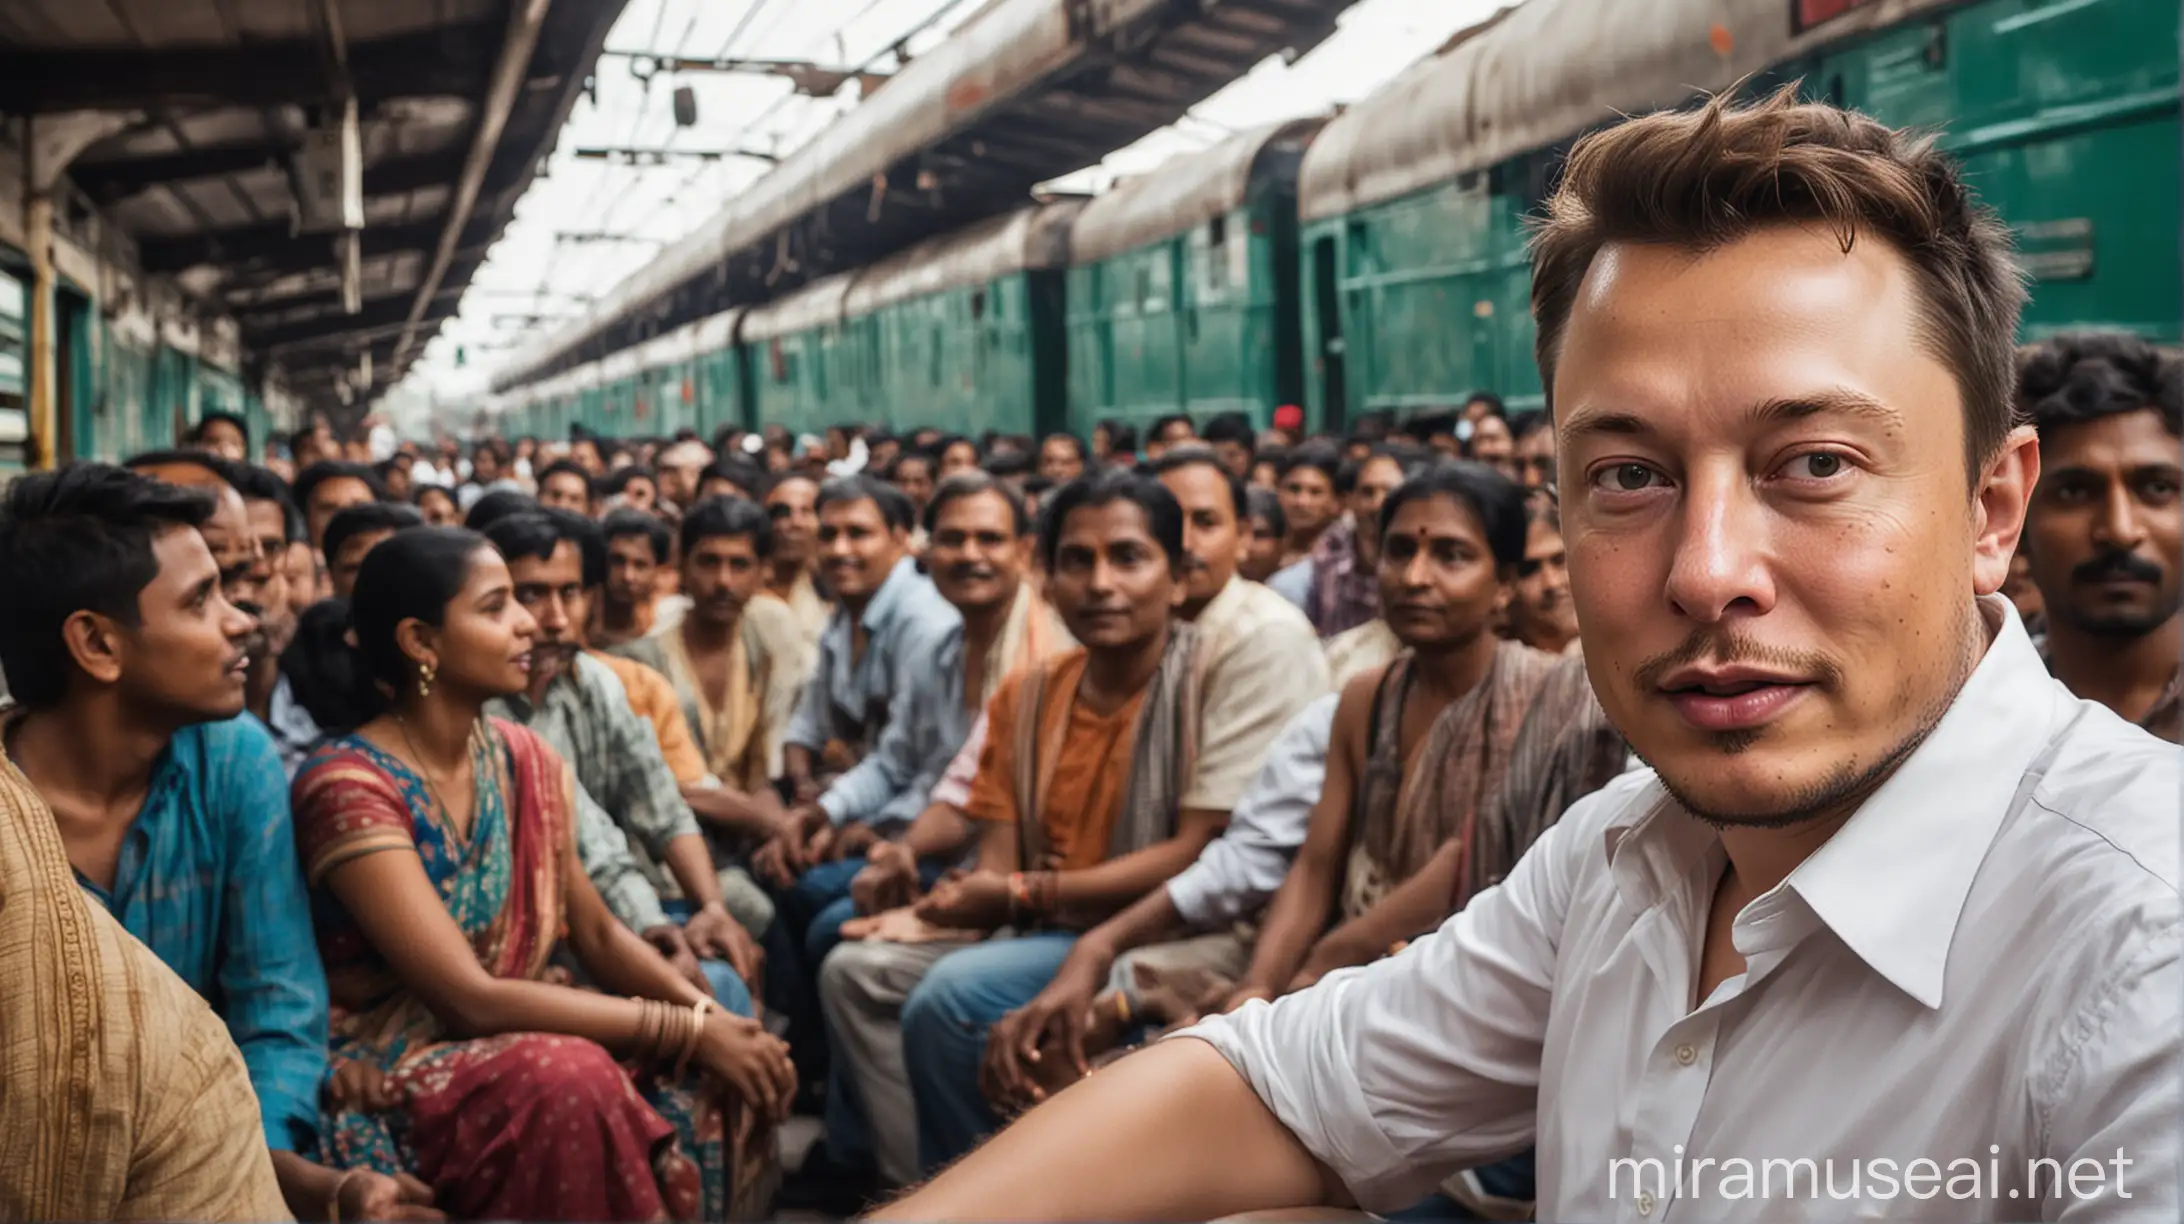 Elon Musk Immersed in Indian Train Experience Amidst Local Commuters